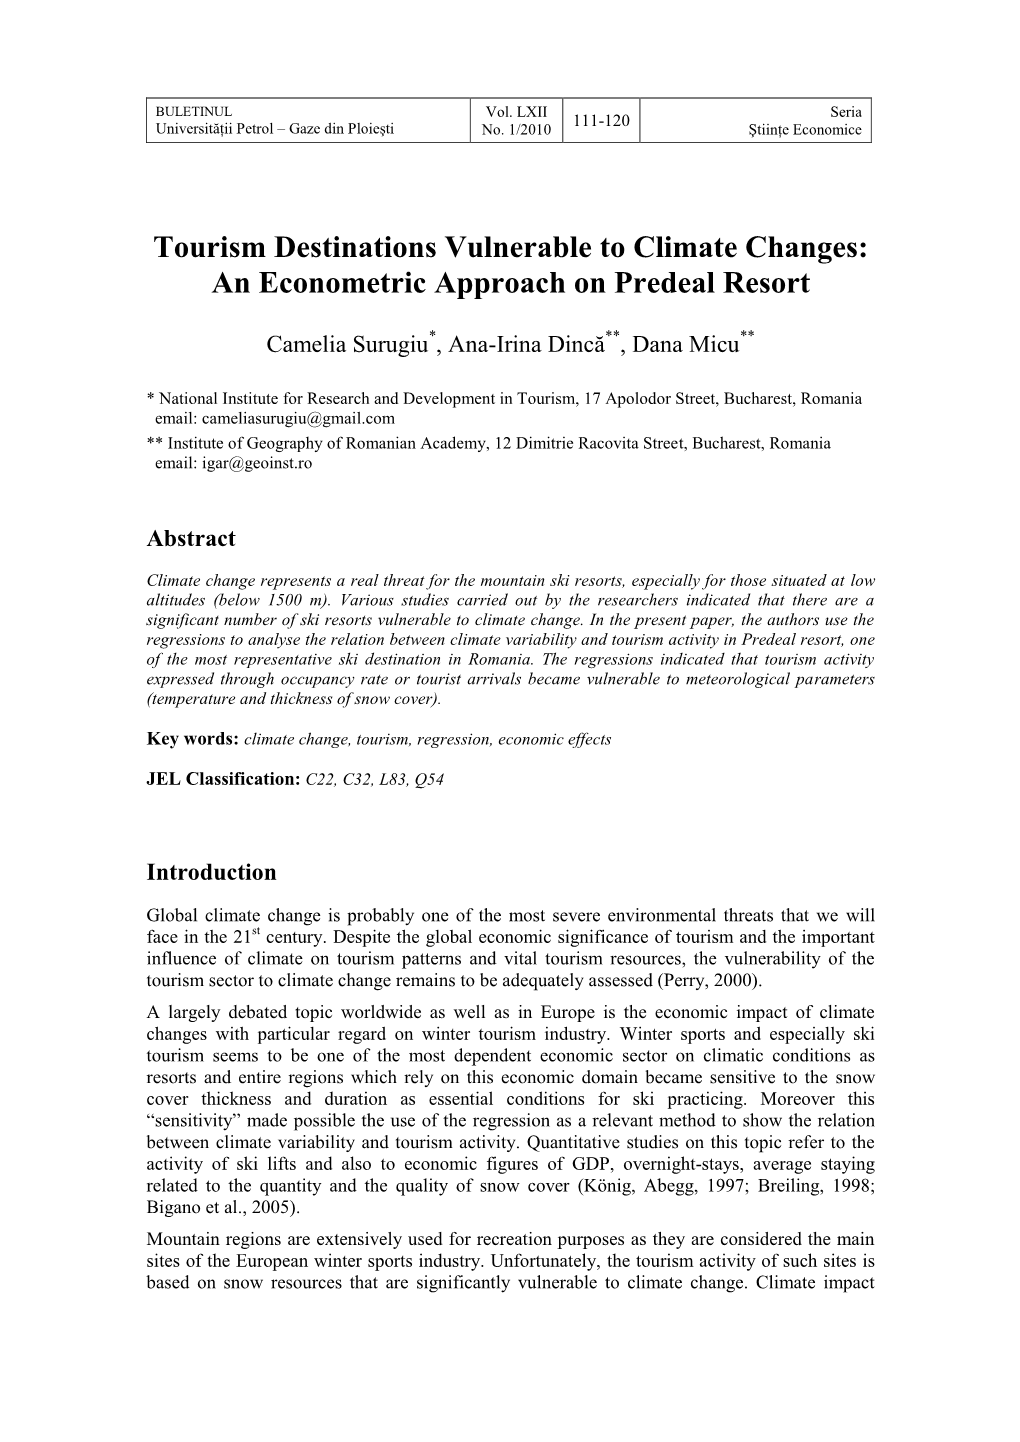 Tourism Destinations Vulnerable to Climate Changes: an Econometric Approach on Predeal Resort